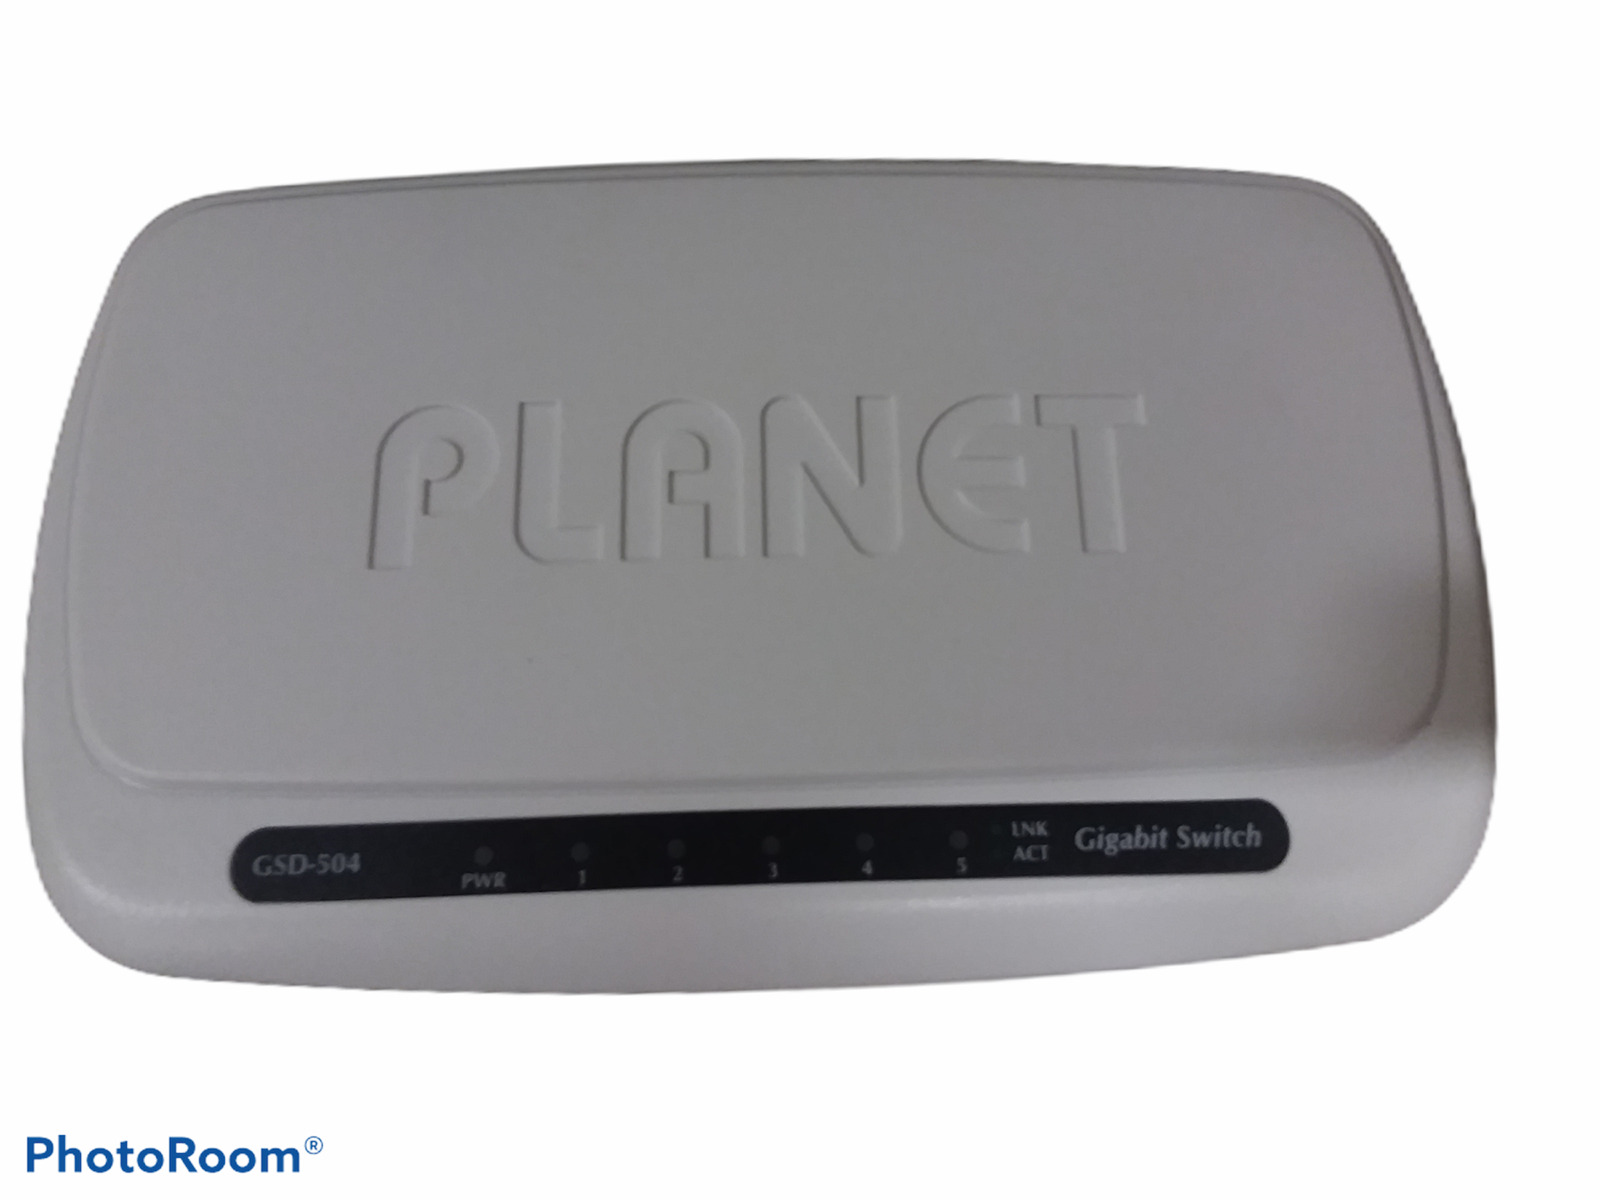 Planet Networking GSD-504 ver 7 5-Port Gigabit Ethernet Switch Home/SOHO Switch 